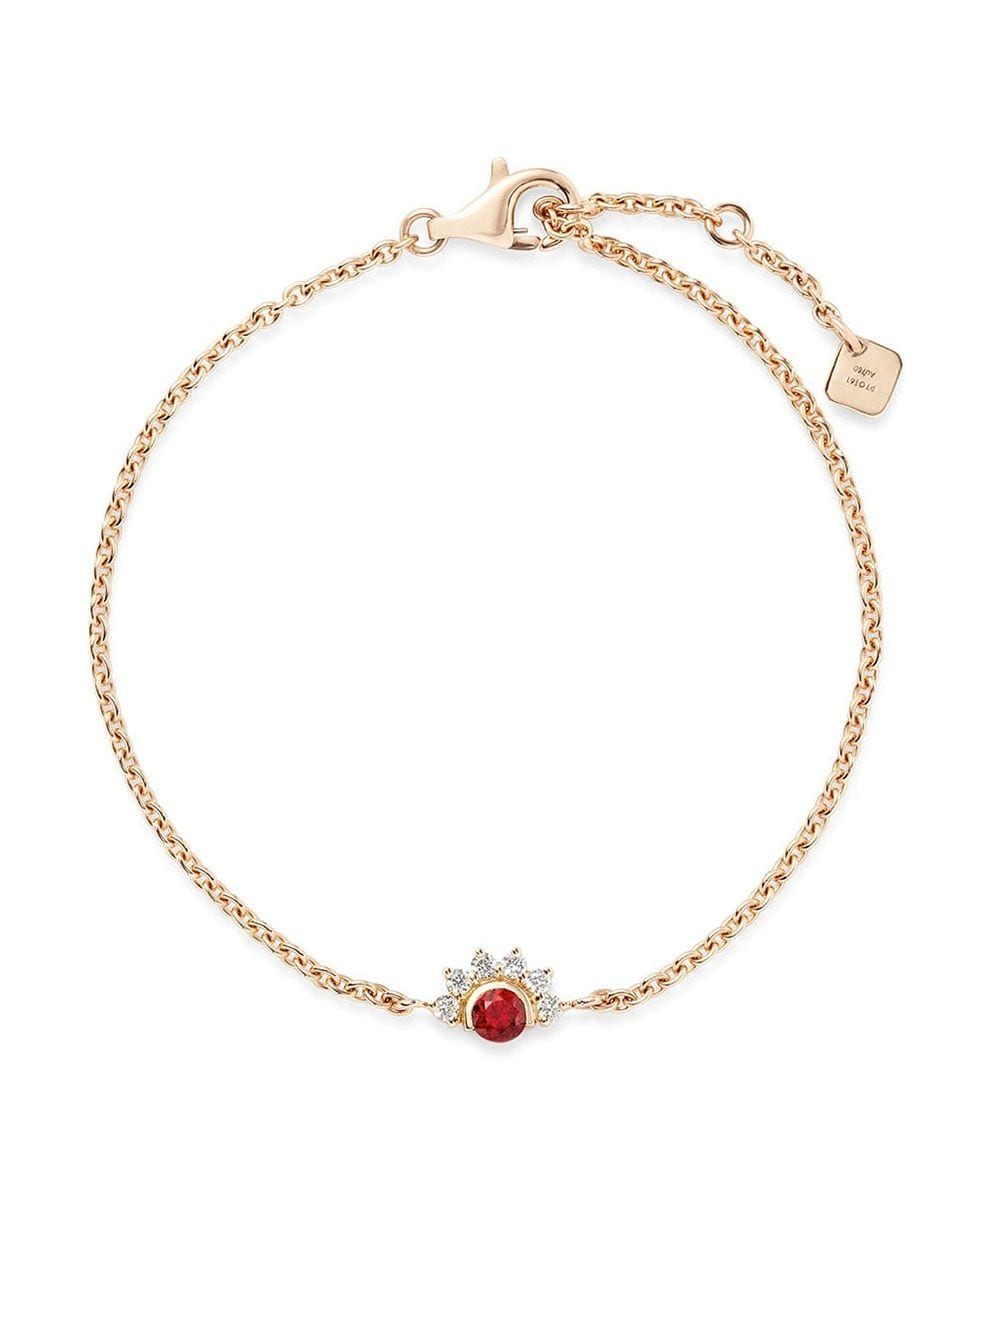 Nouvel Heritage 18kt Yellow Gold Mystic Diamond And Red Spinel Bracelet